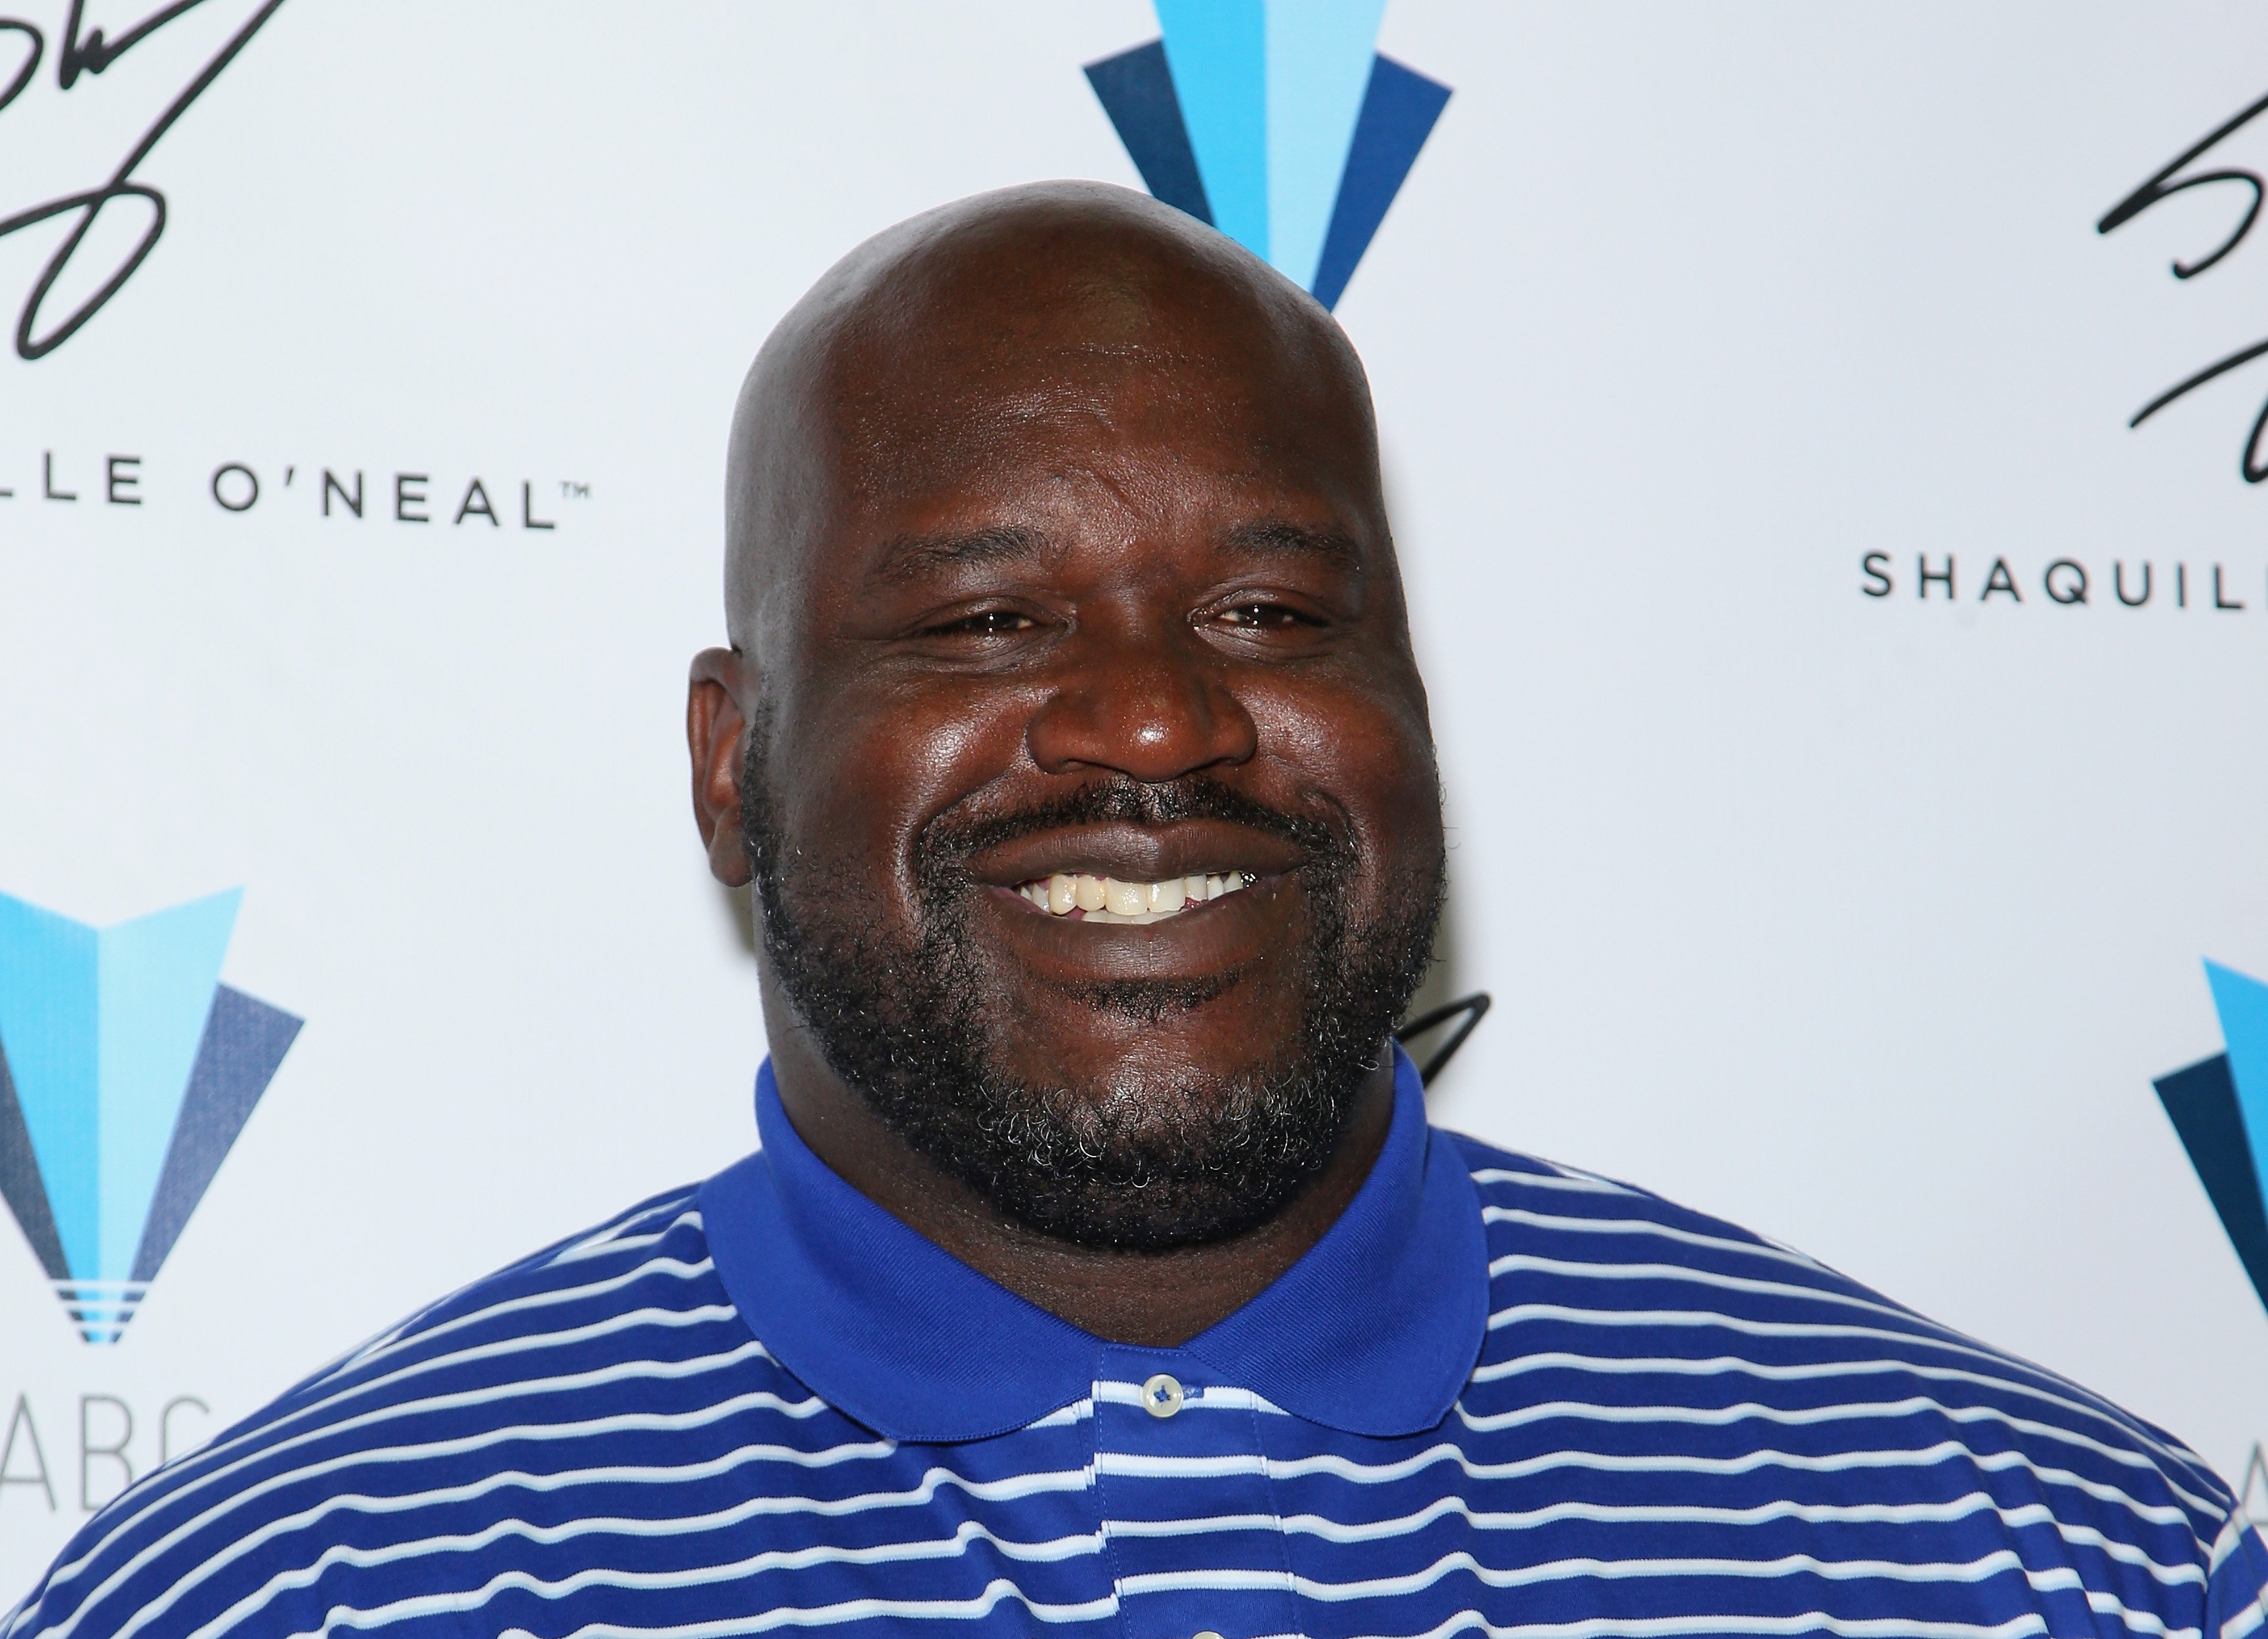 Shaquille O'Neal at the Mandalay Bay Convention Center on June 21, 2016. | Photo: Getty Images